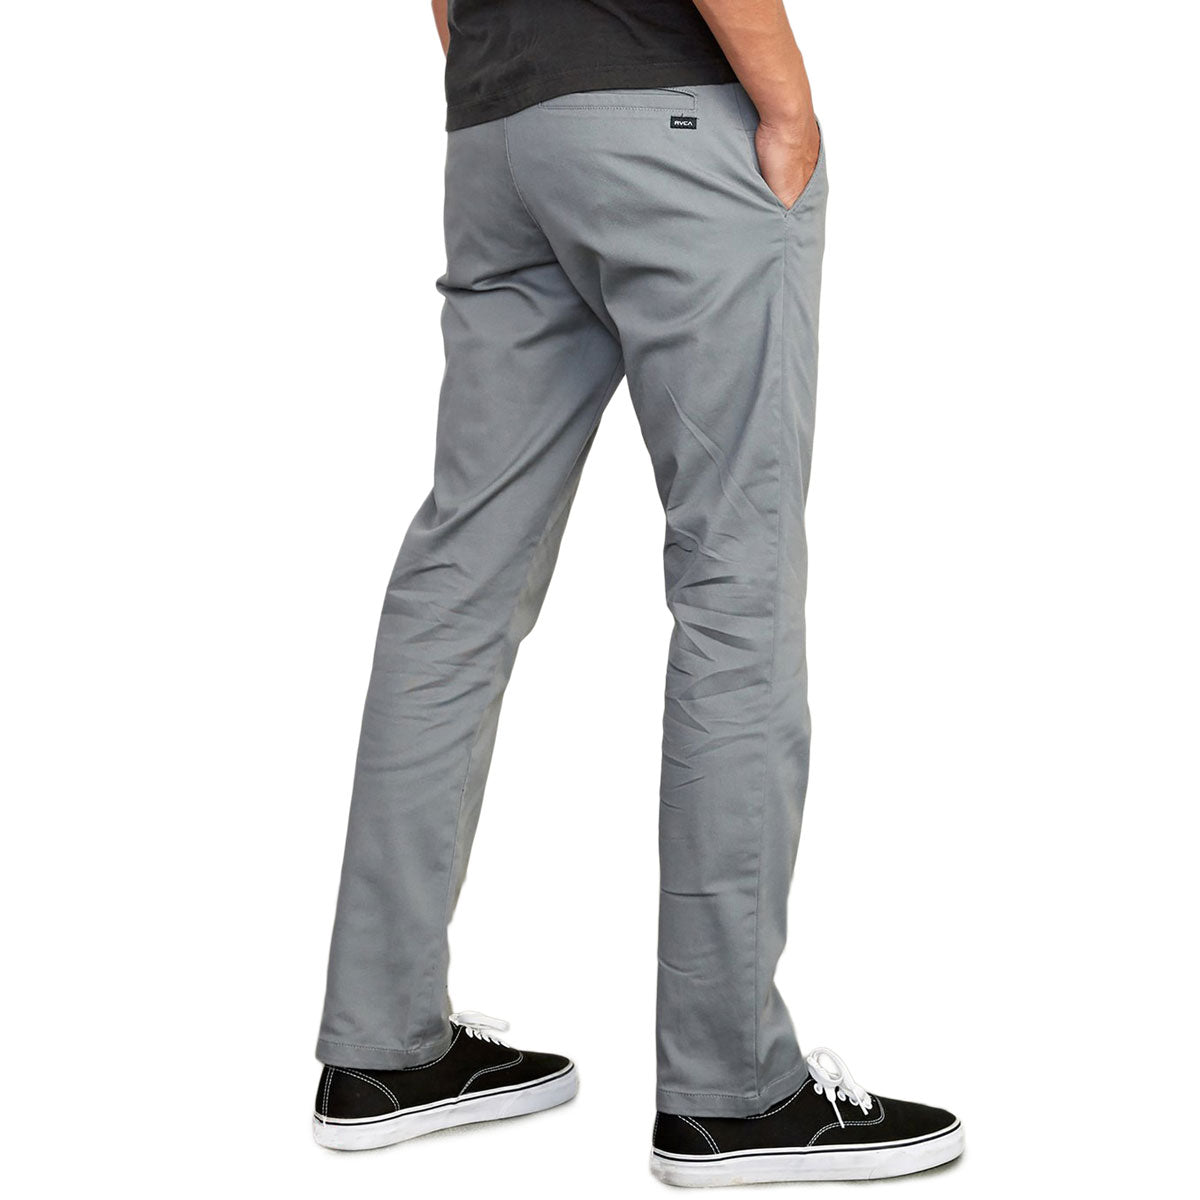 RVCA Weekend Stretch Pants - Smoked image 2